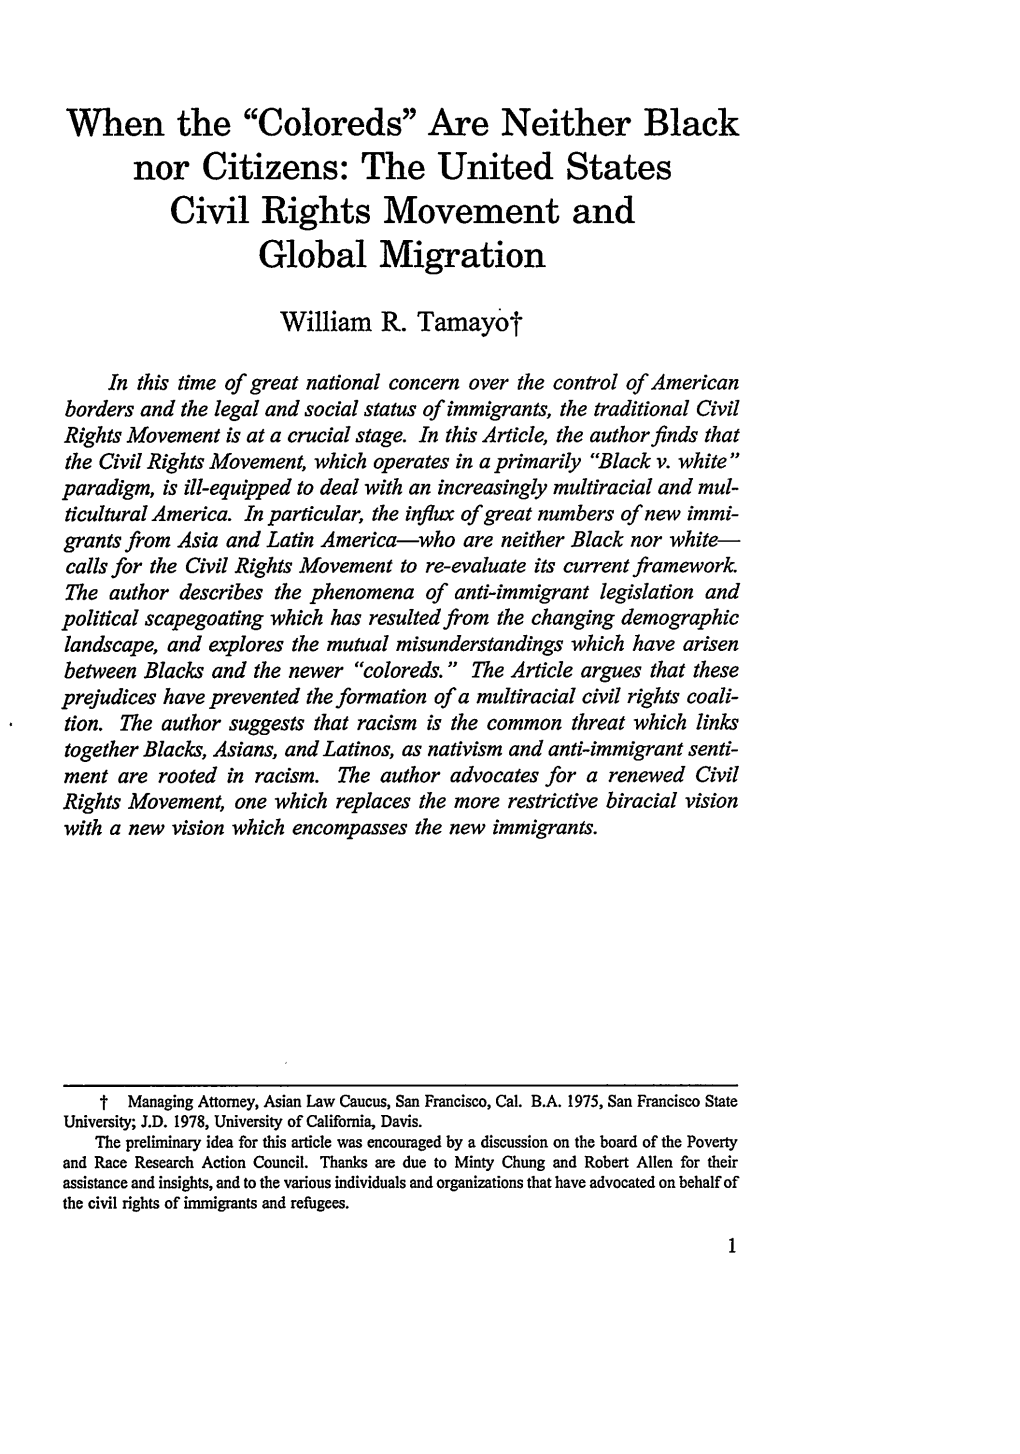 The United States Civil Rights Movement and Global Migration